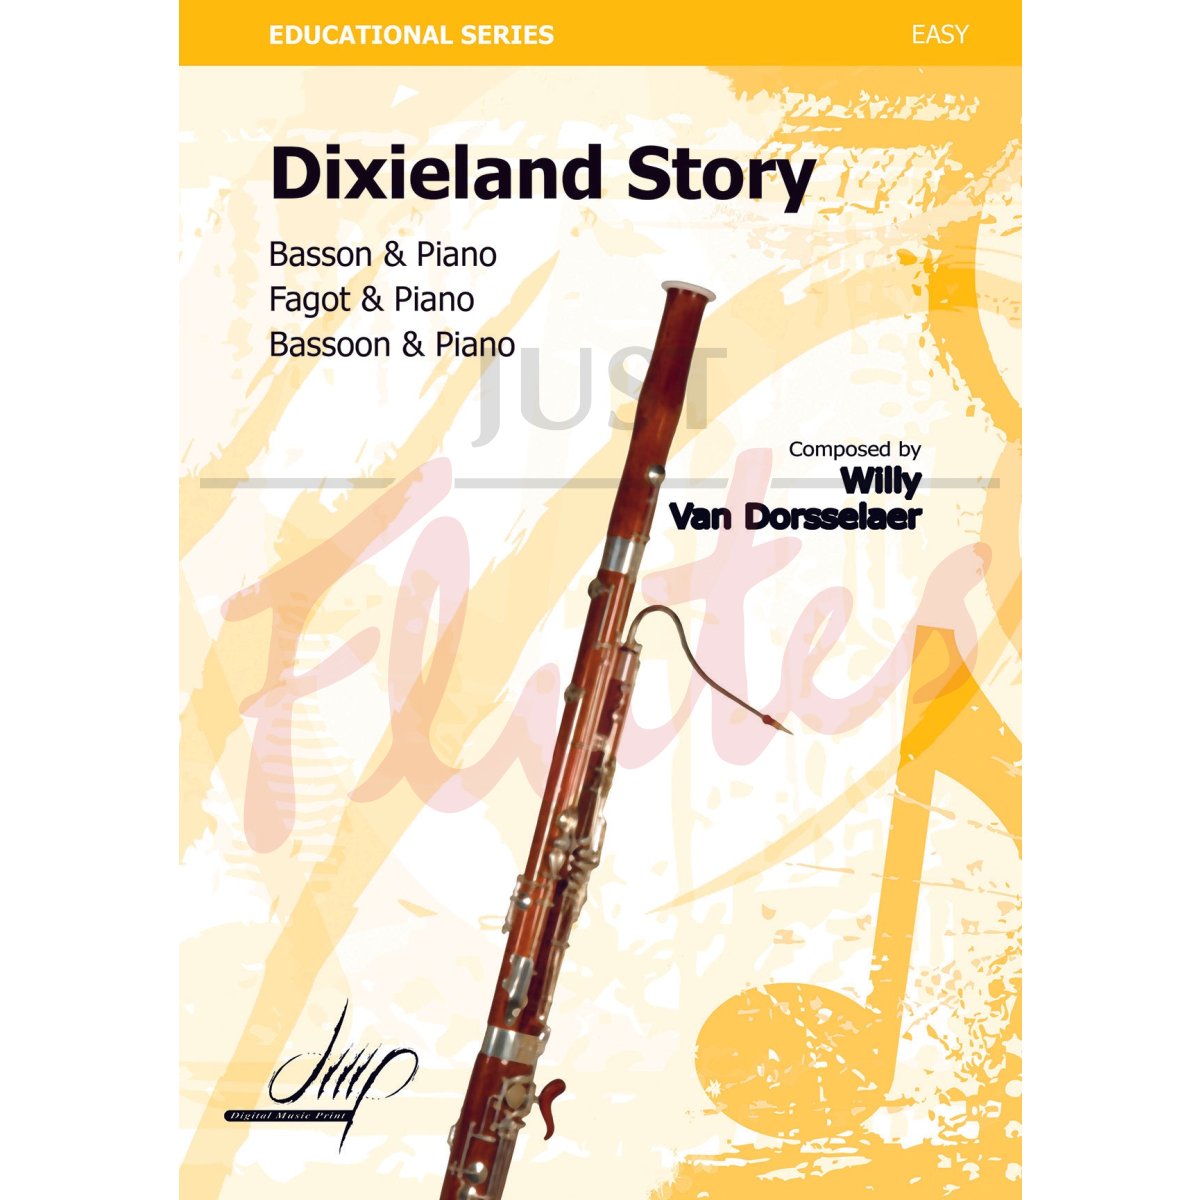 Dixieland Story for Bassoon and Piano